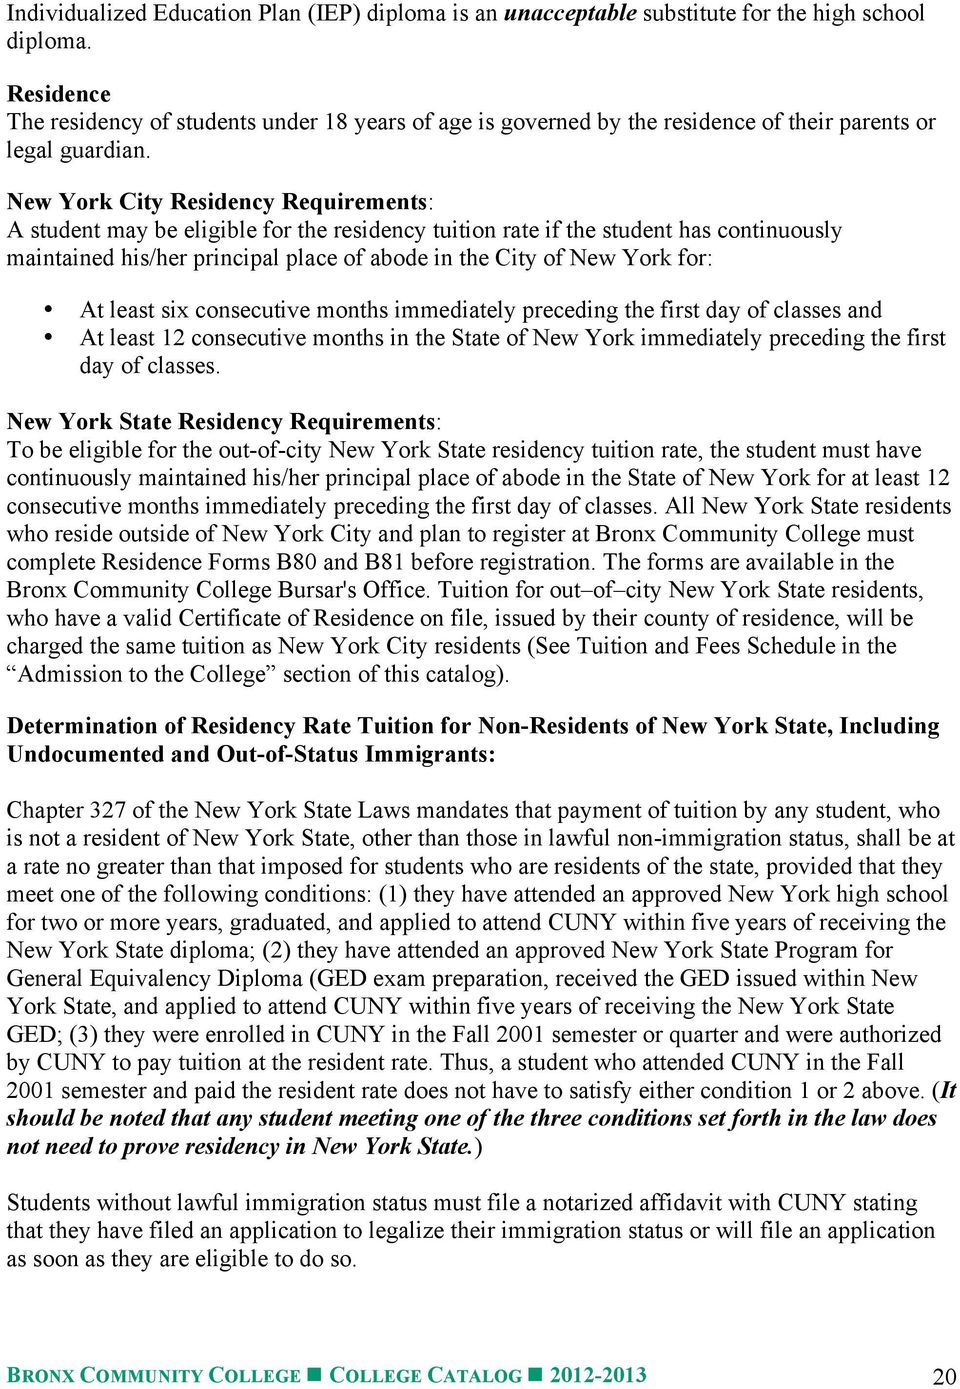 New York City Residency Requirements: A student may be eligible for the residency tuition rate if the student has continuously maintained his/her principal place of abode in the City of New York for: